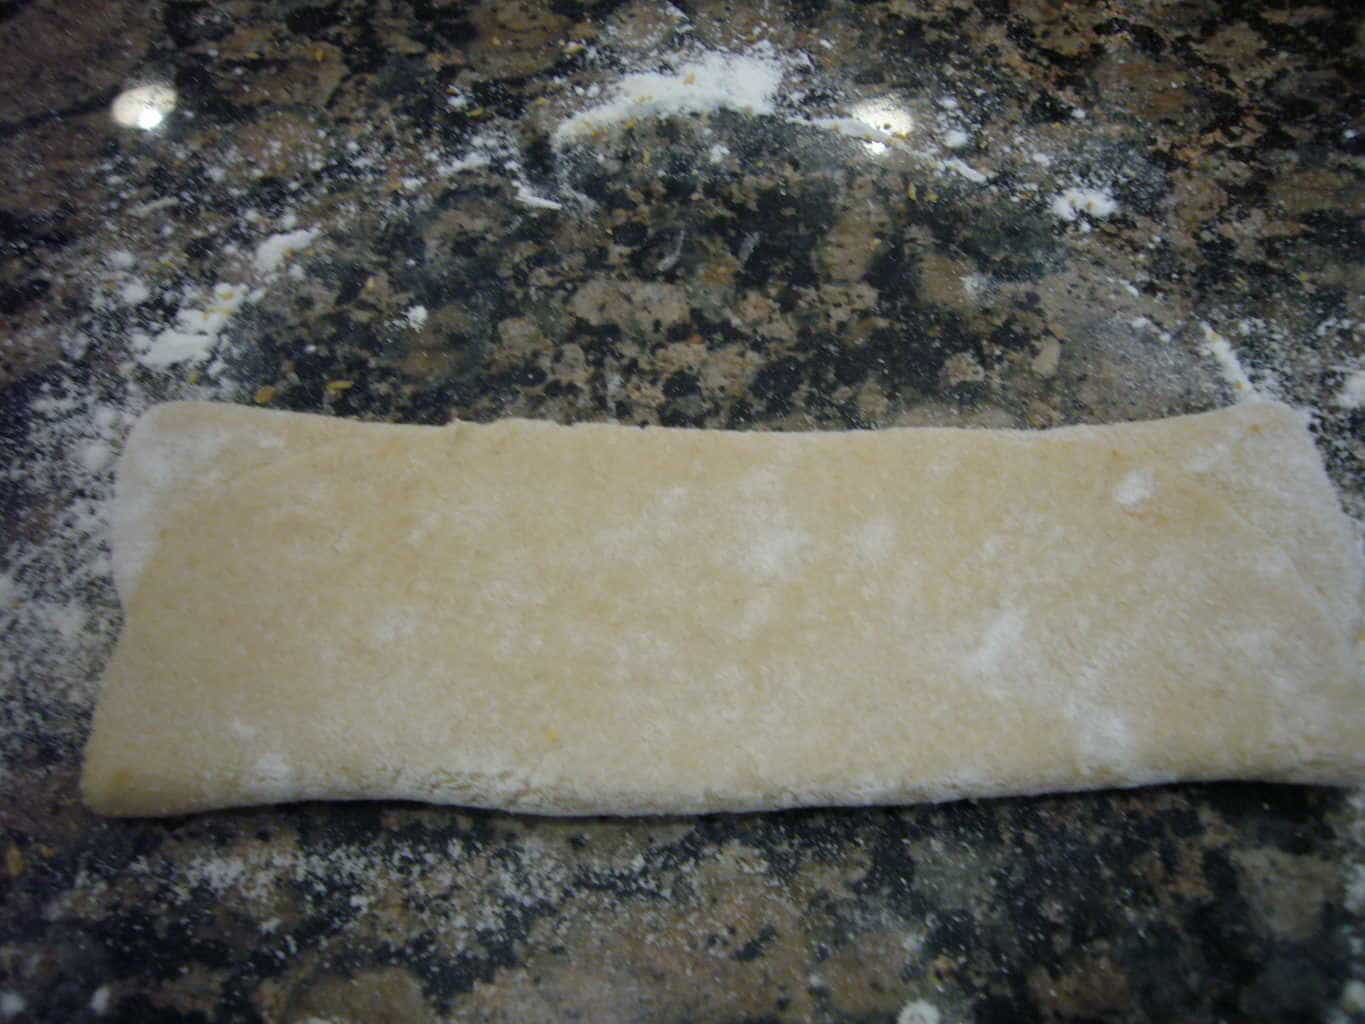 The other side of the dough is also folded over to make the paratha.